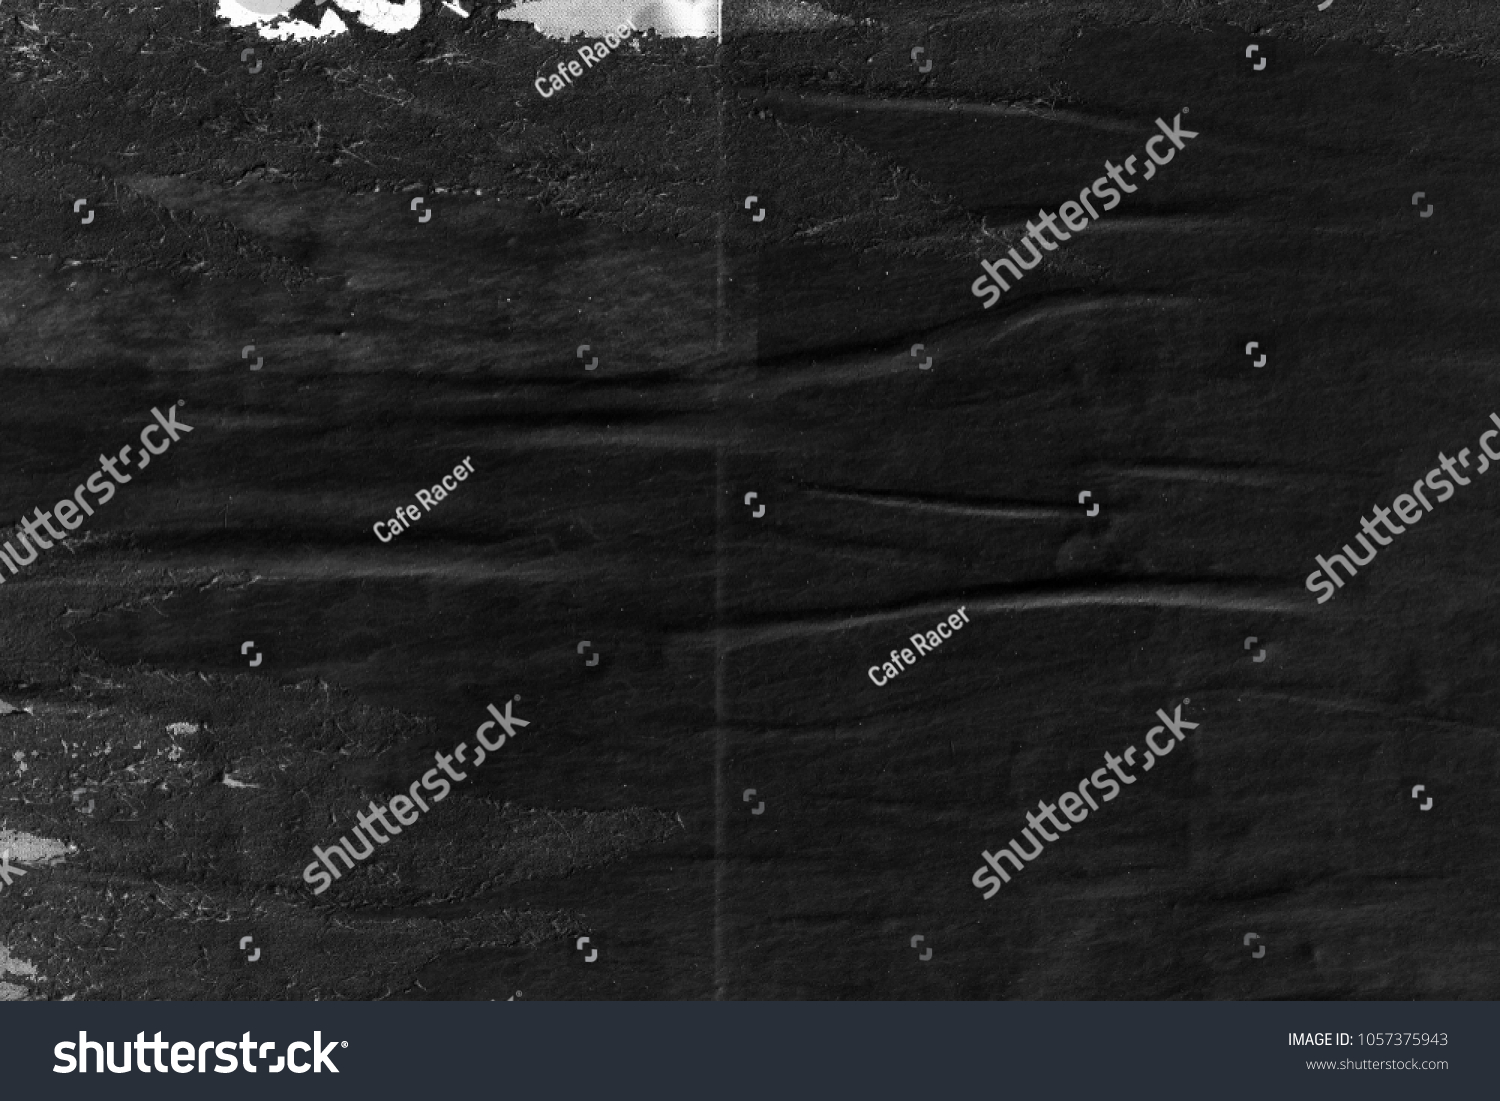 Dark black grey paper background creased crumpled surface old torn ripped posters placard grunge textures   #1057375943